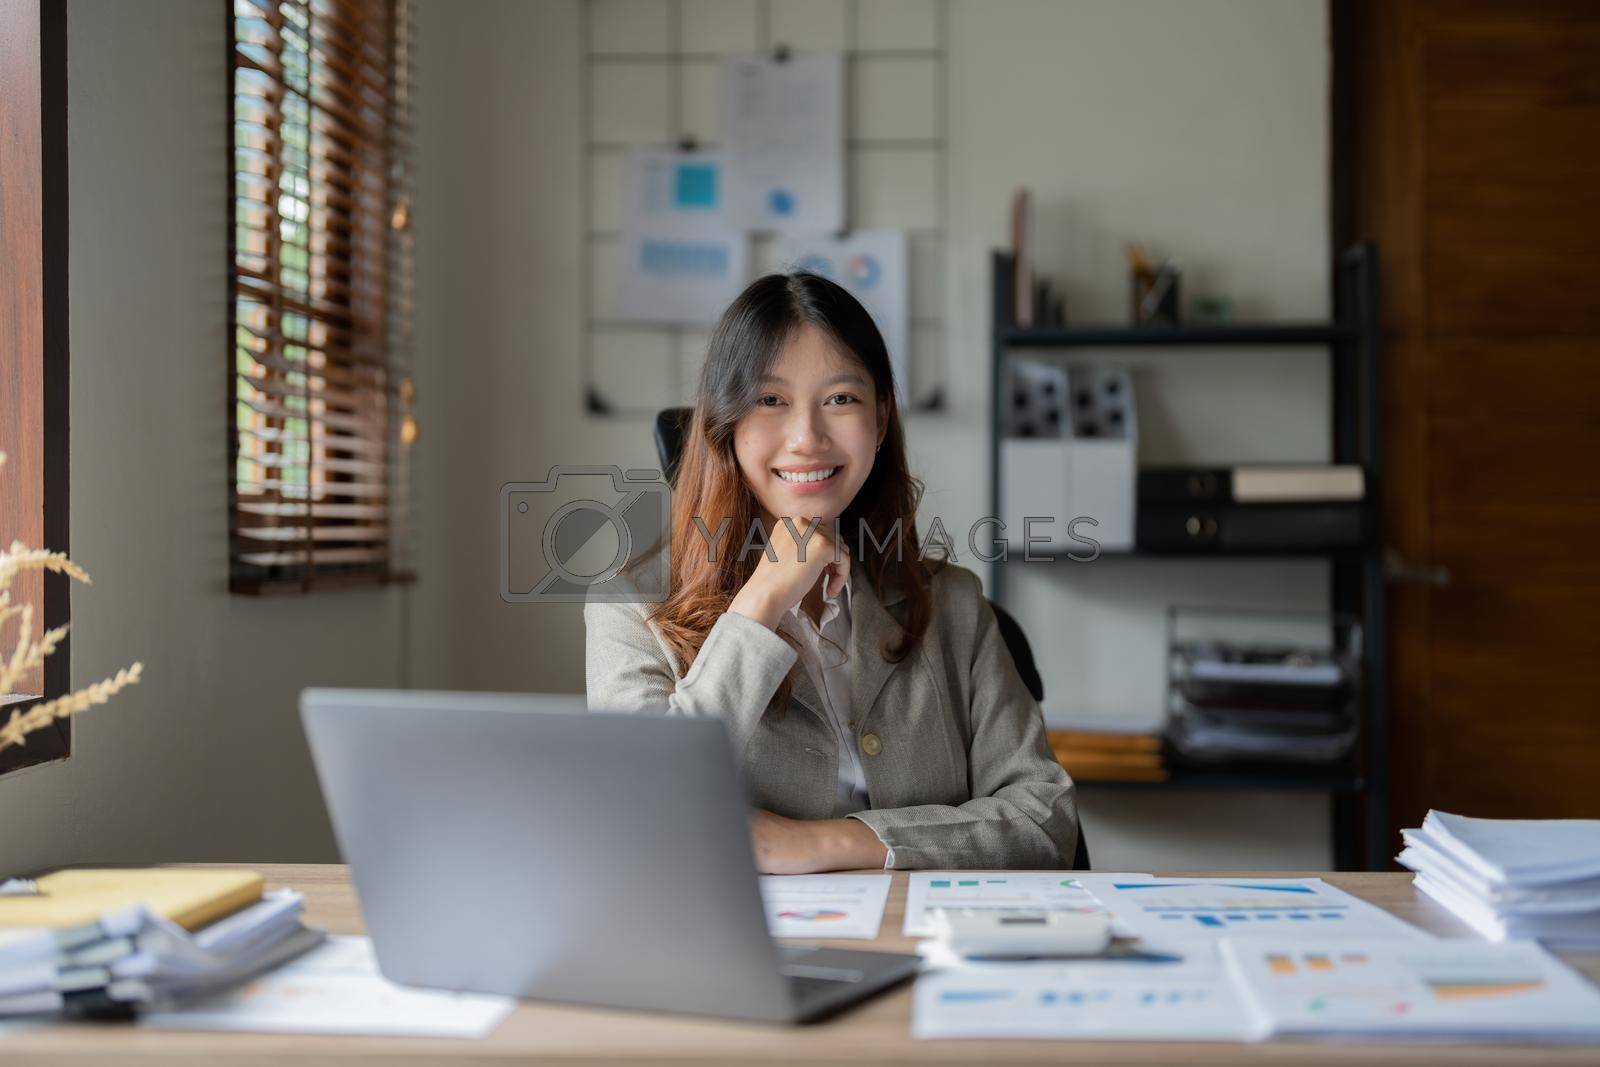 Royalty free image of Portrait pretty asian businesswoman smiles at the camera while sitting at her desk in front of the laptop computer by nateemee